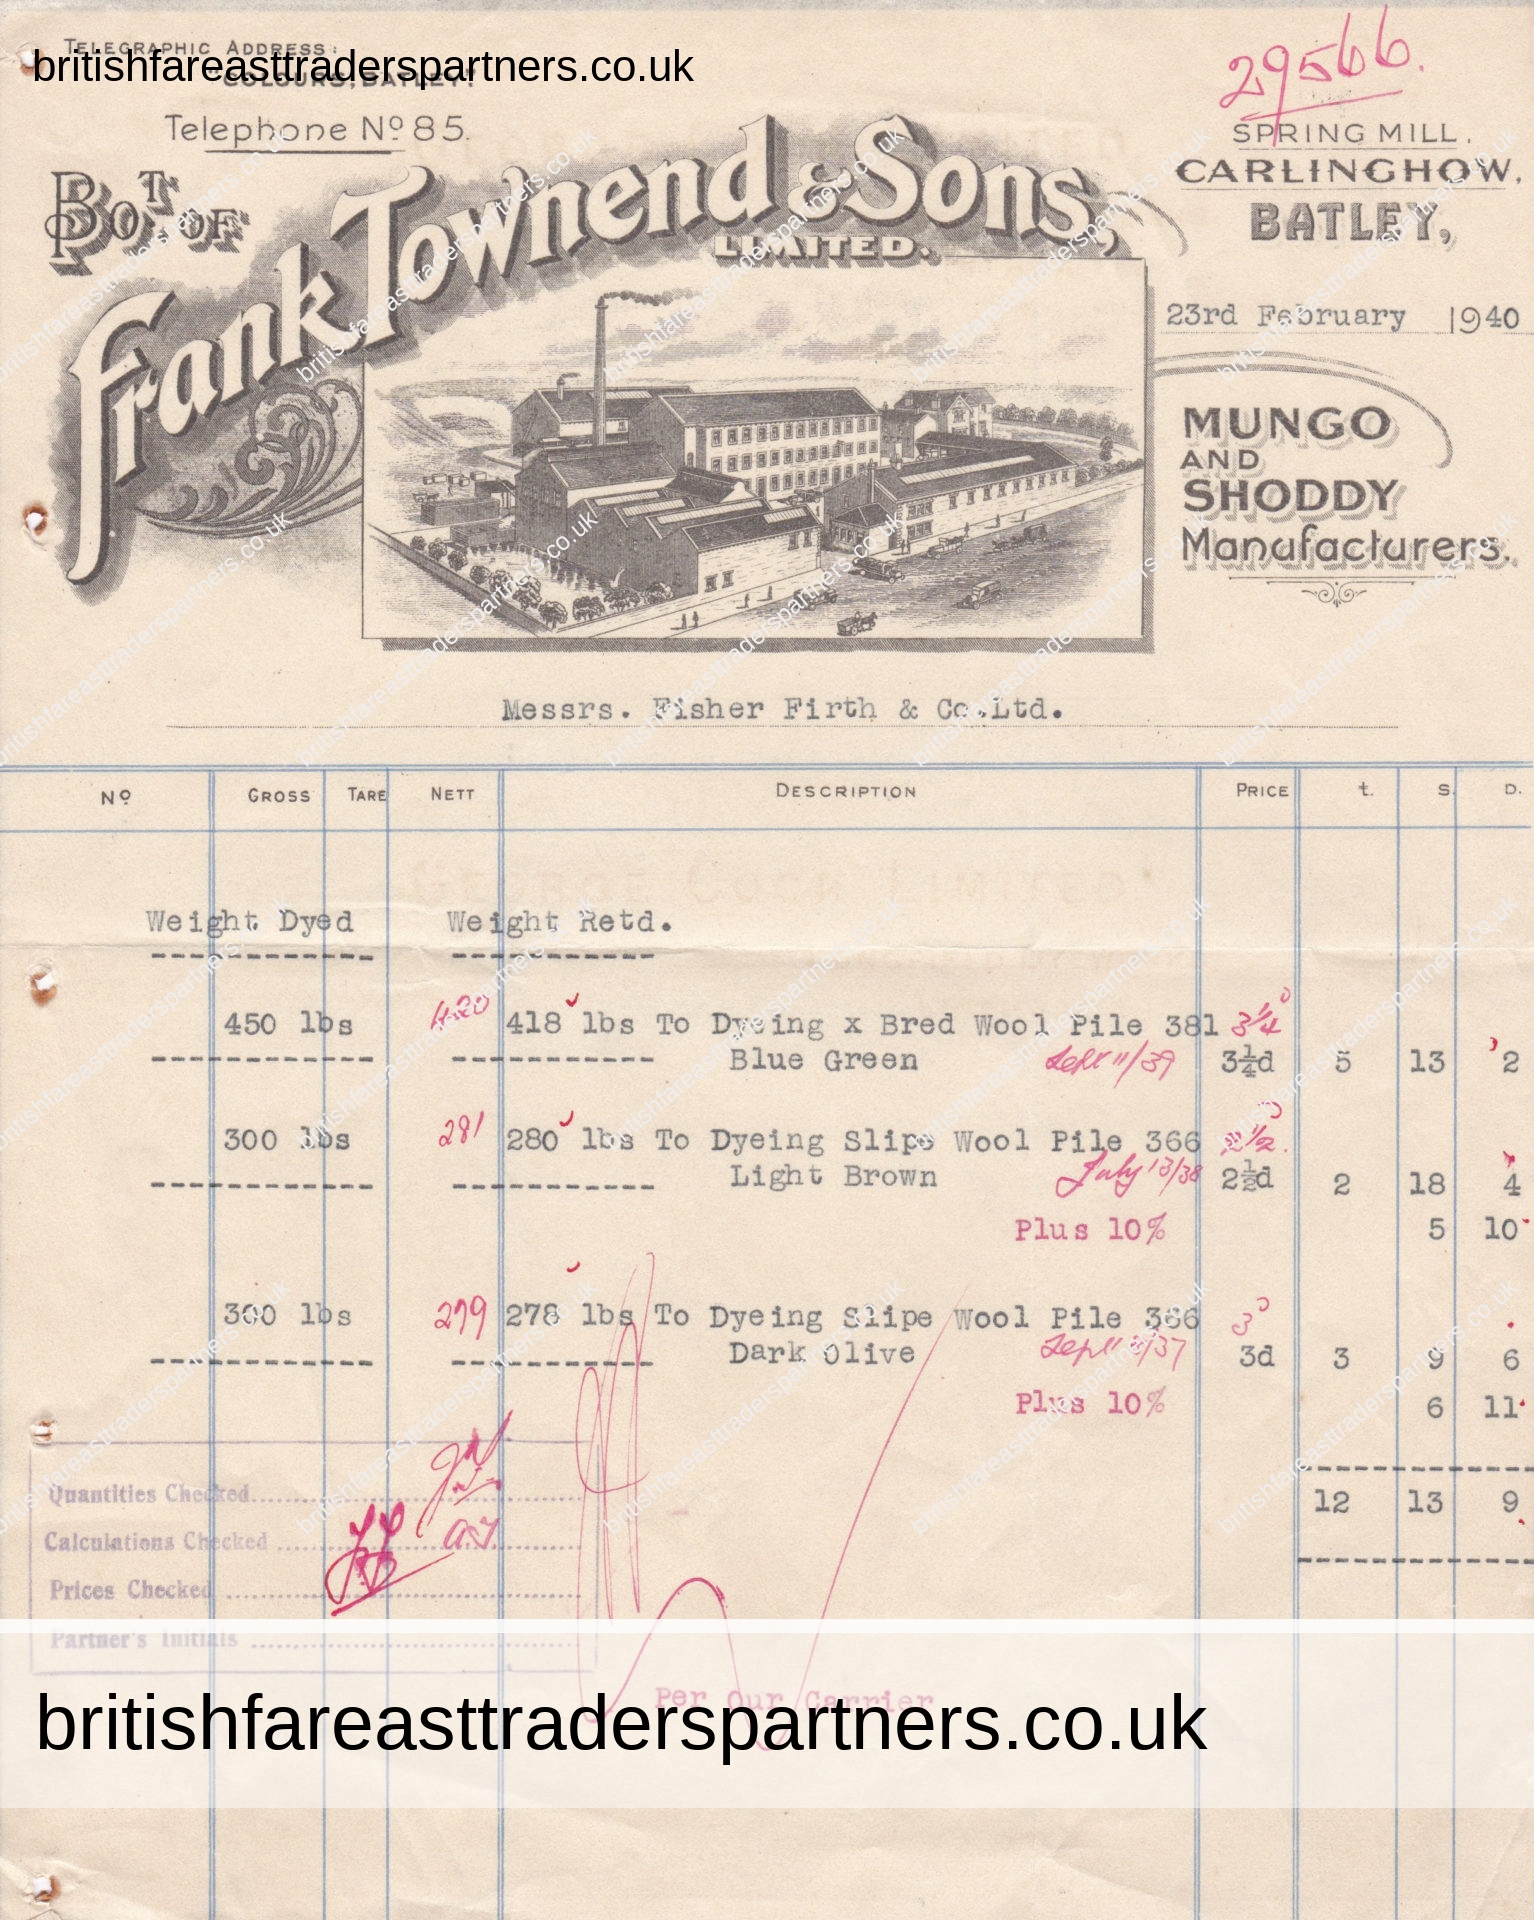 VINTAGE 1940 INVOICE / BILLHEAD “FRANK TOWNEND & SONS, LIMITED” MUNGO AND SHODDY MANUFACTURERS SPRING MILL, CARLINGHOW, BATLEY COLLECTABLES | PAPER & EPHEMERA BUSINESS | COMPANIES |  INVESTMENTS | INDUSTRIES | HERITAGE | HISTORY